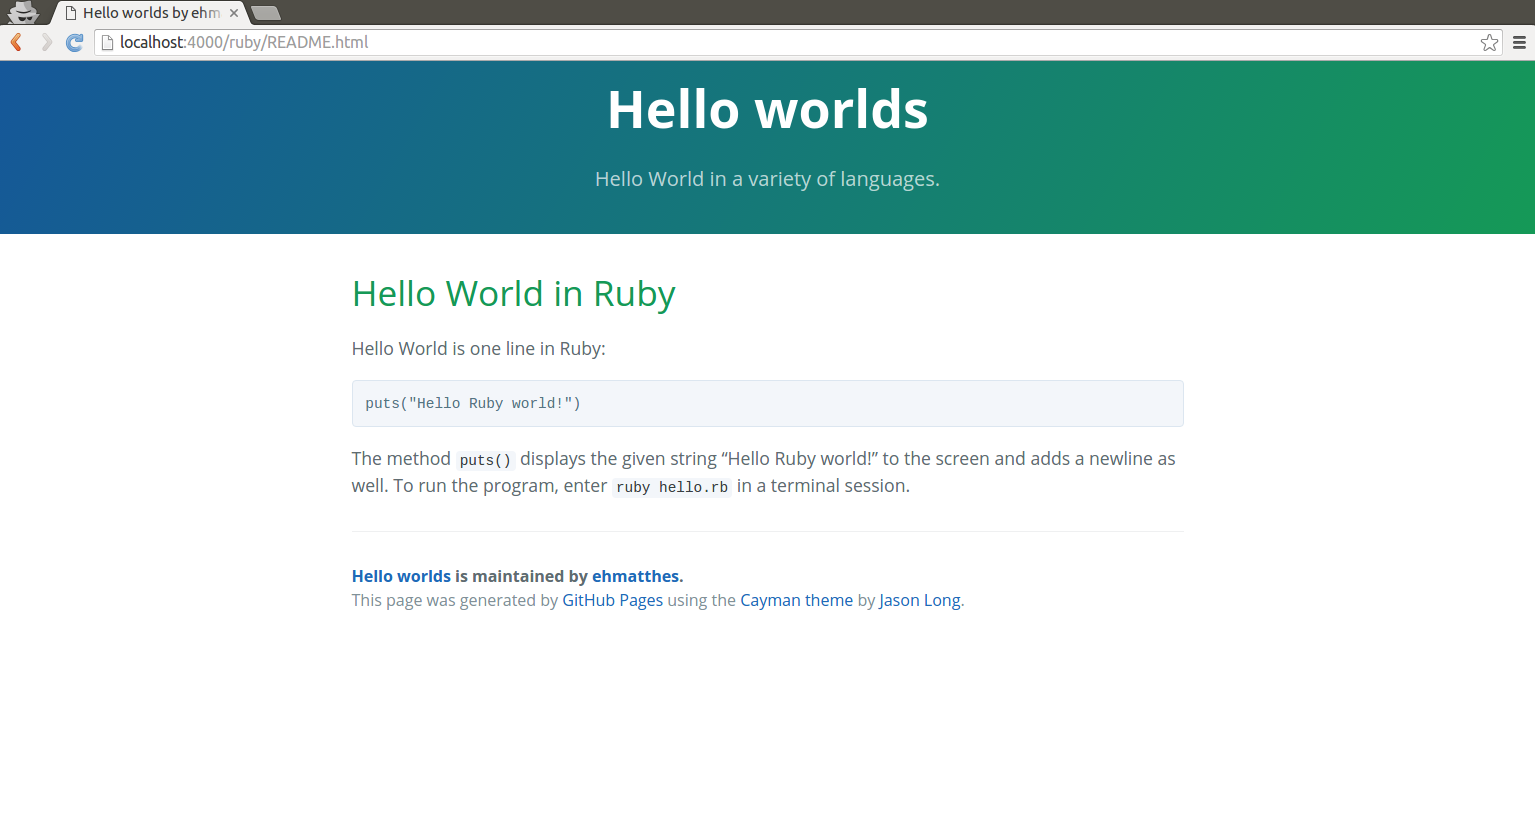 Ruby README page